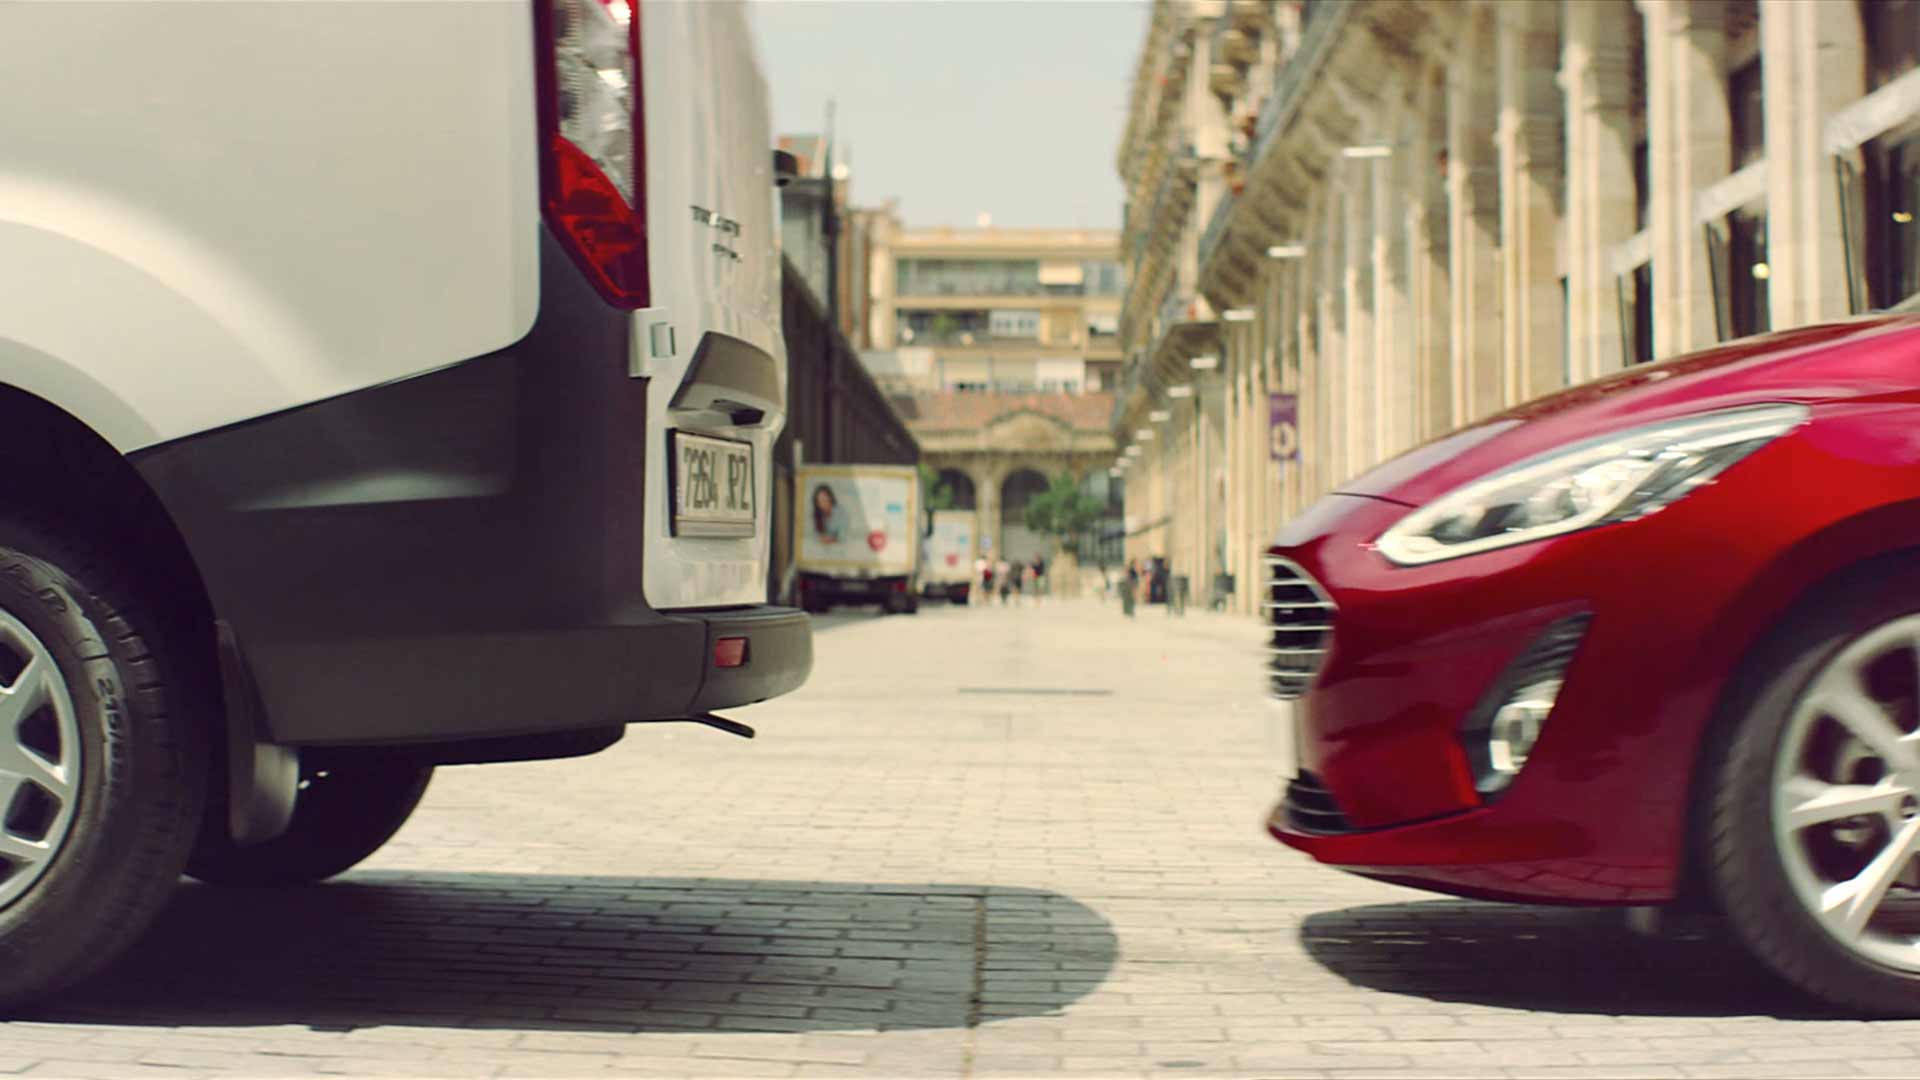 Ford Fiesta showing pre-collision assist